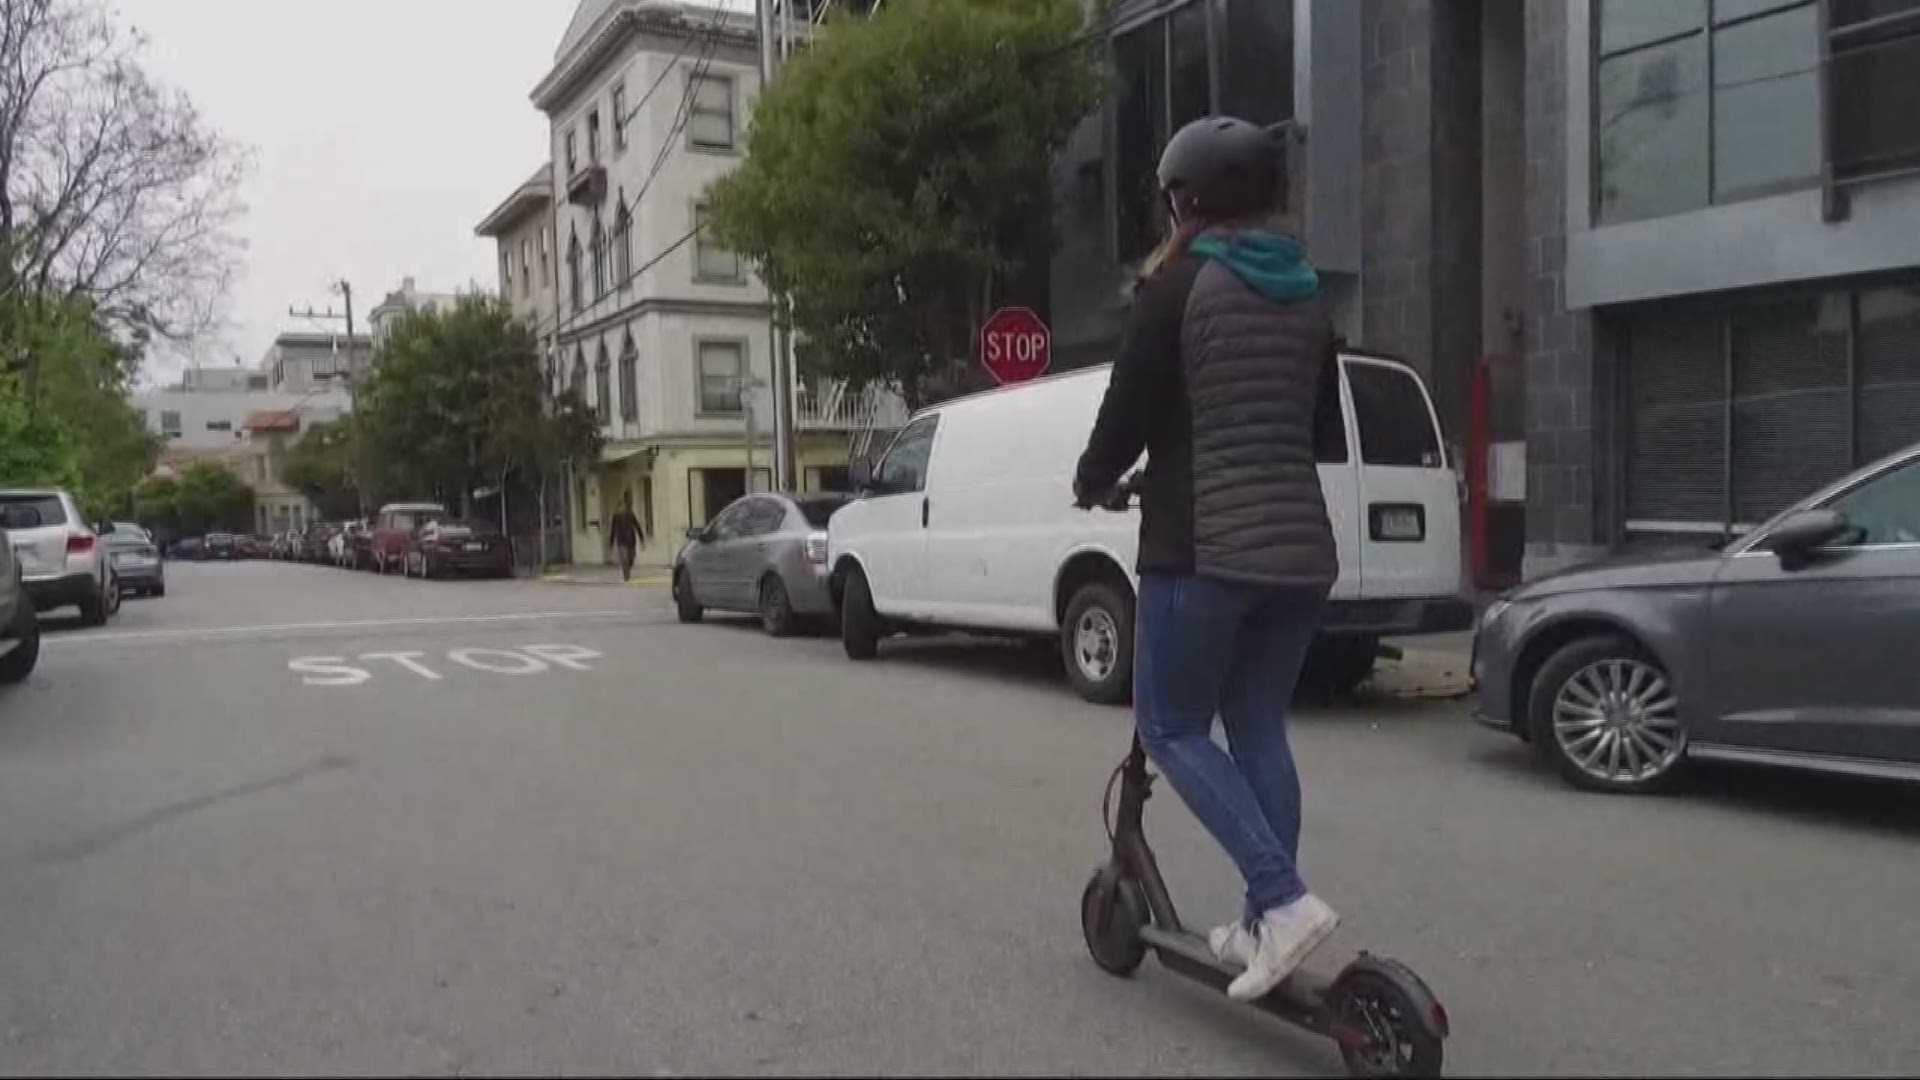 Dockless electric scooters for rent are coming to Portland for a four month trial.